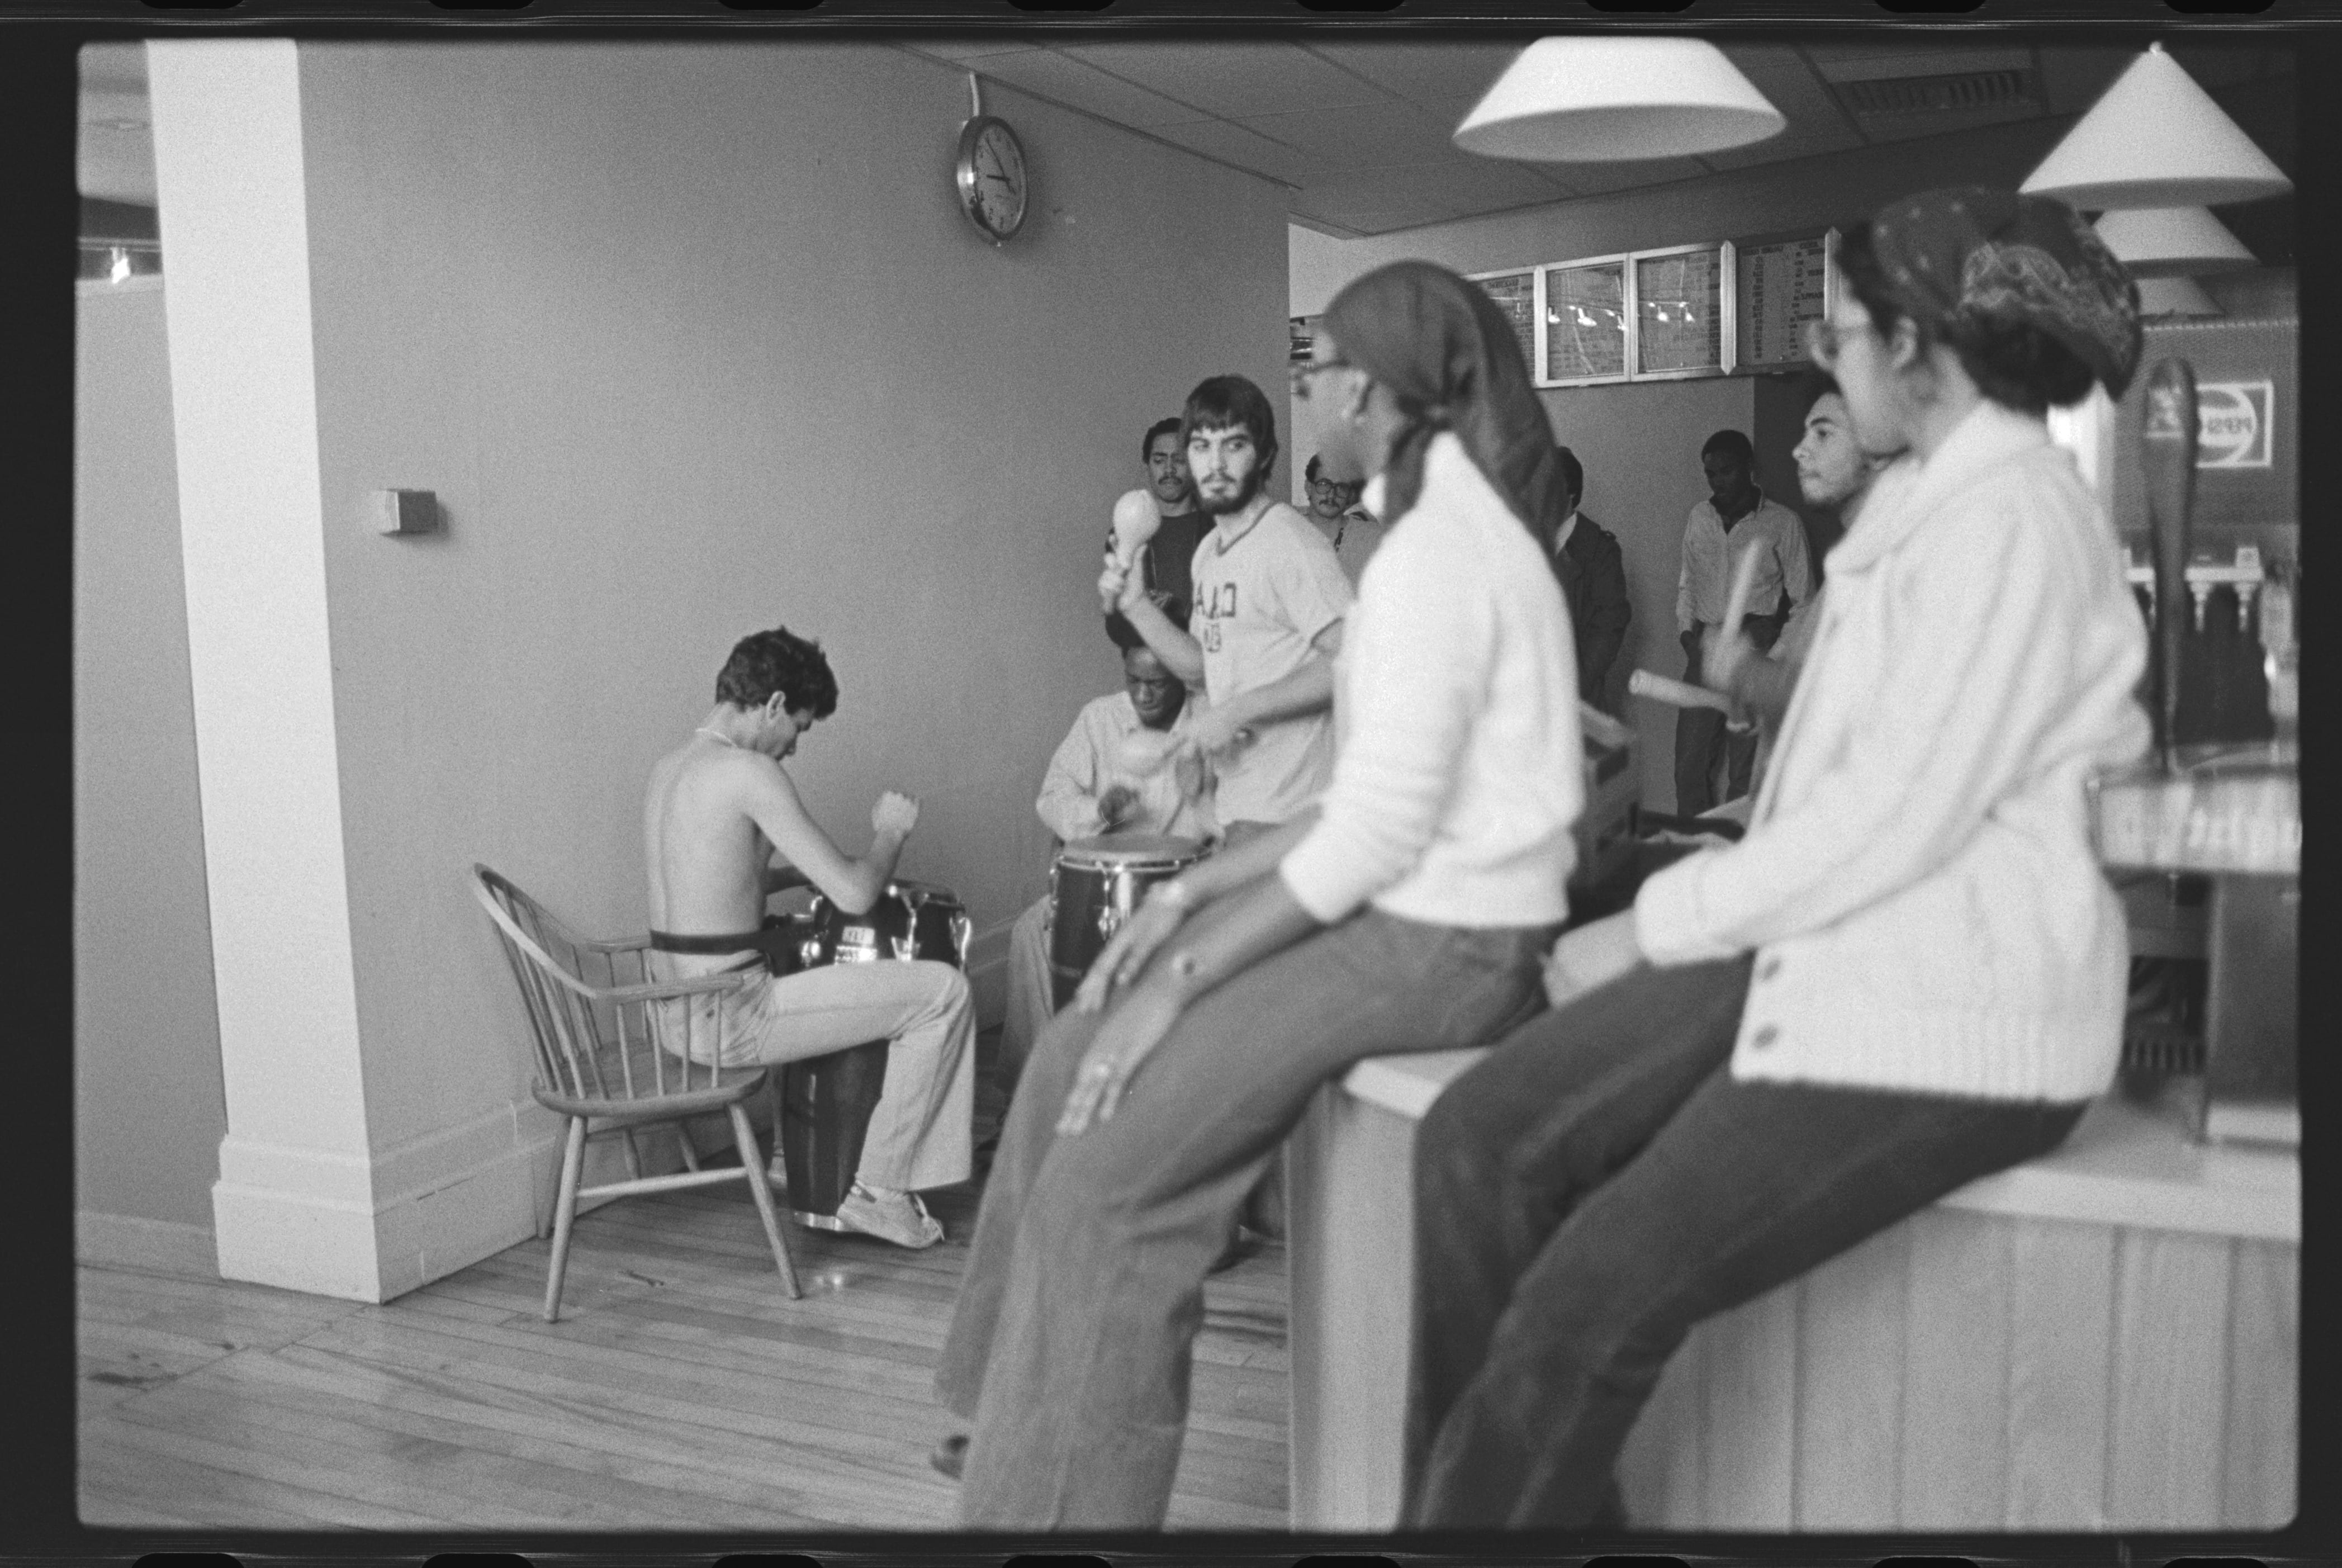 Image of several students in Fayerweather snack bar, some playing music